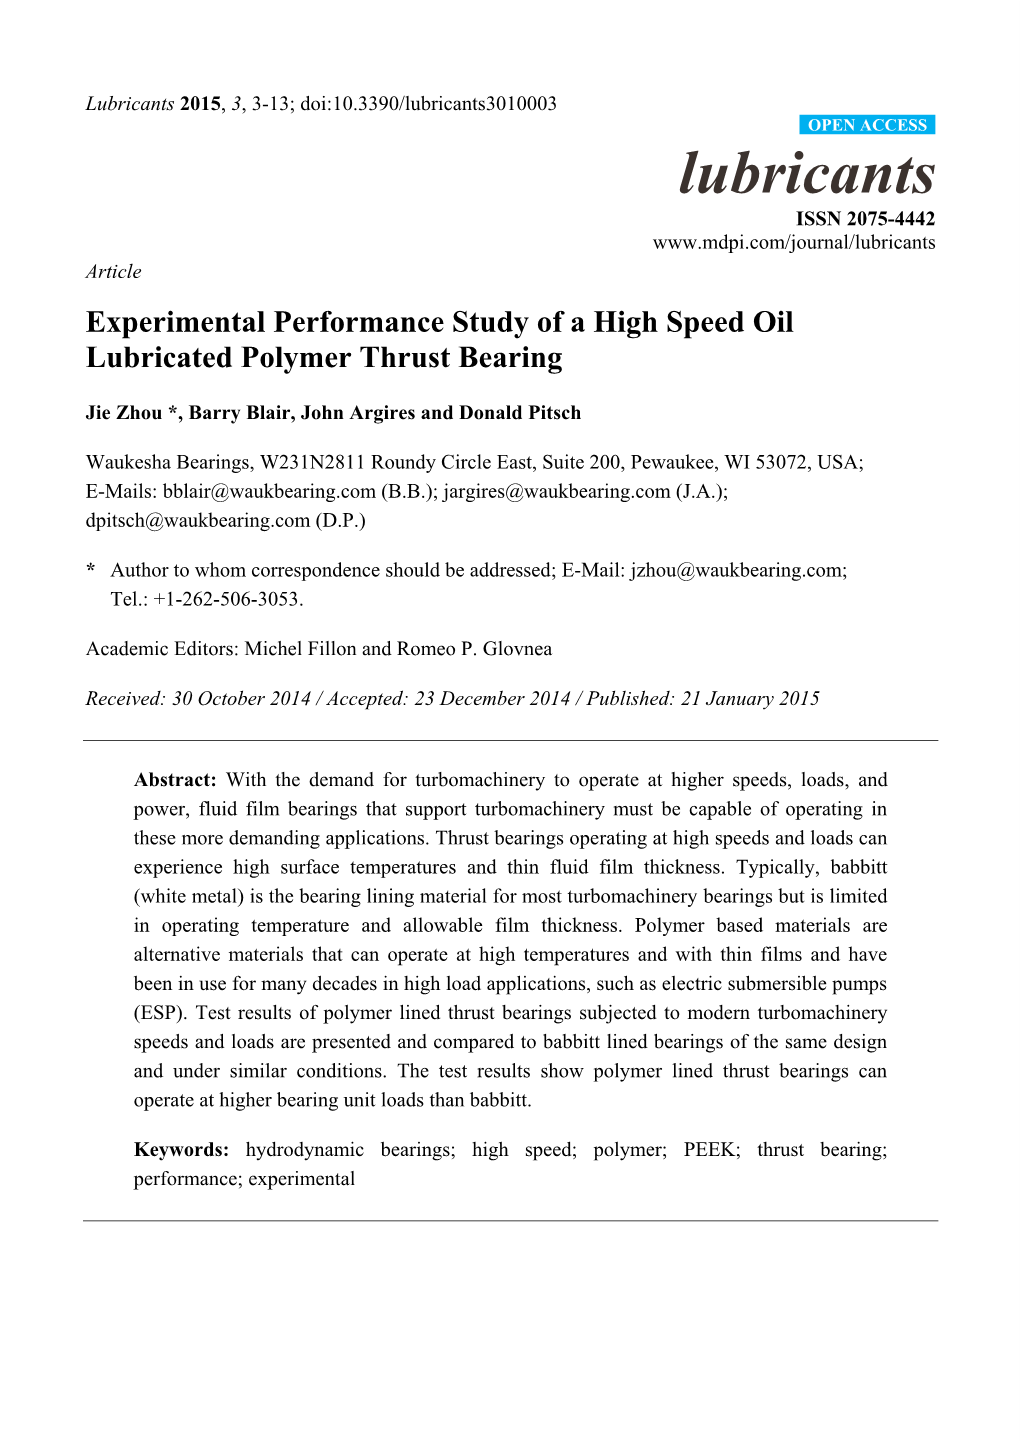 Experimental Performance Study of a High Speed Oil Lubricated Polymer Thrust Bearing